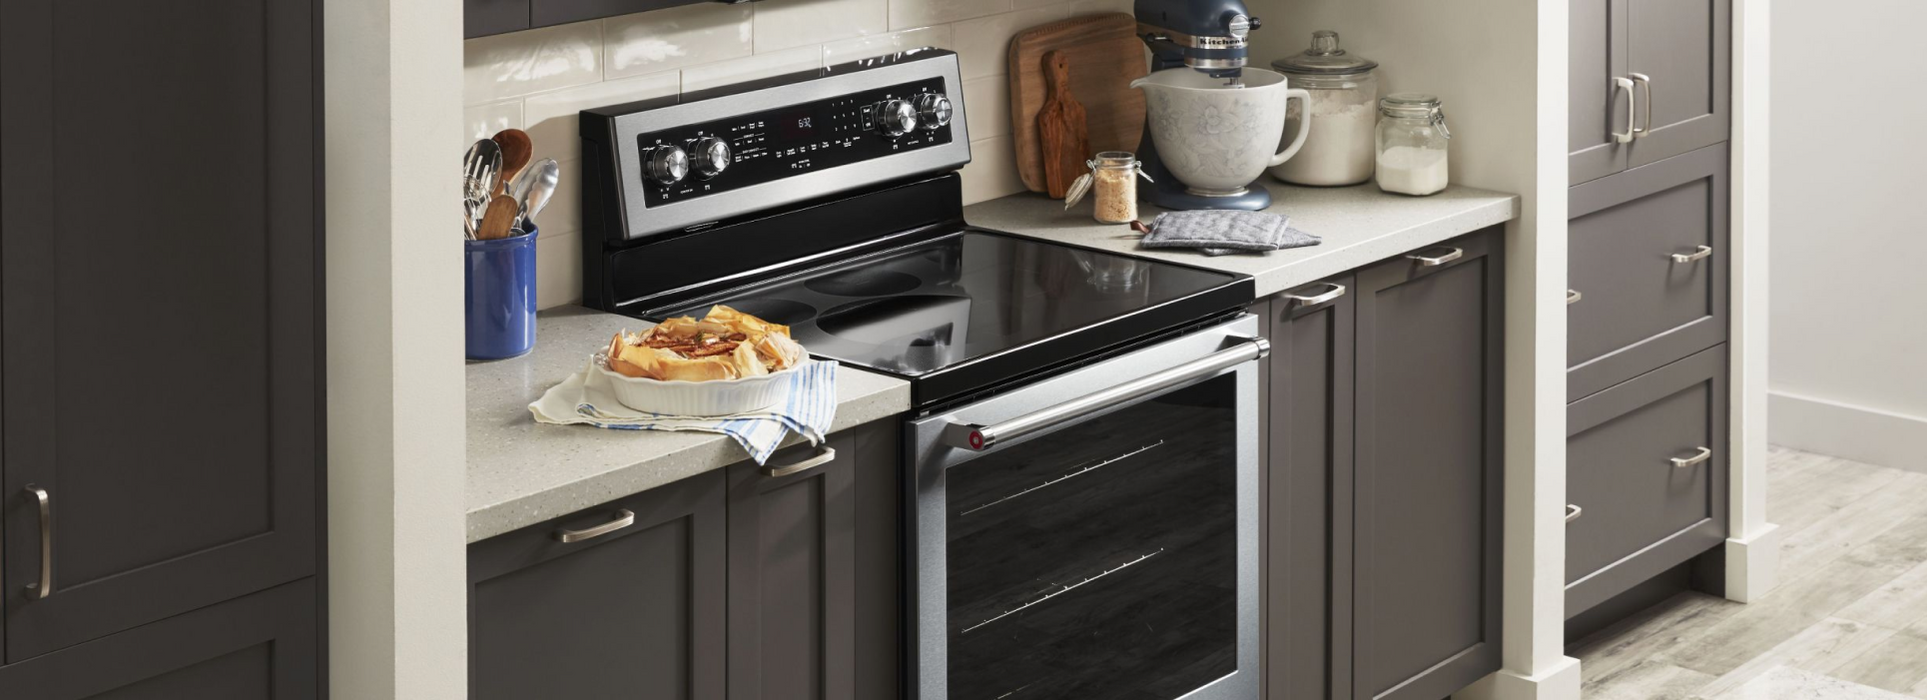 Energy-Efficient Smart Stove for Your Smart Kitchen